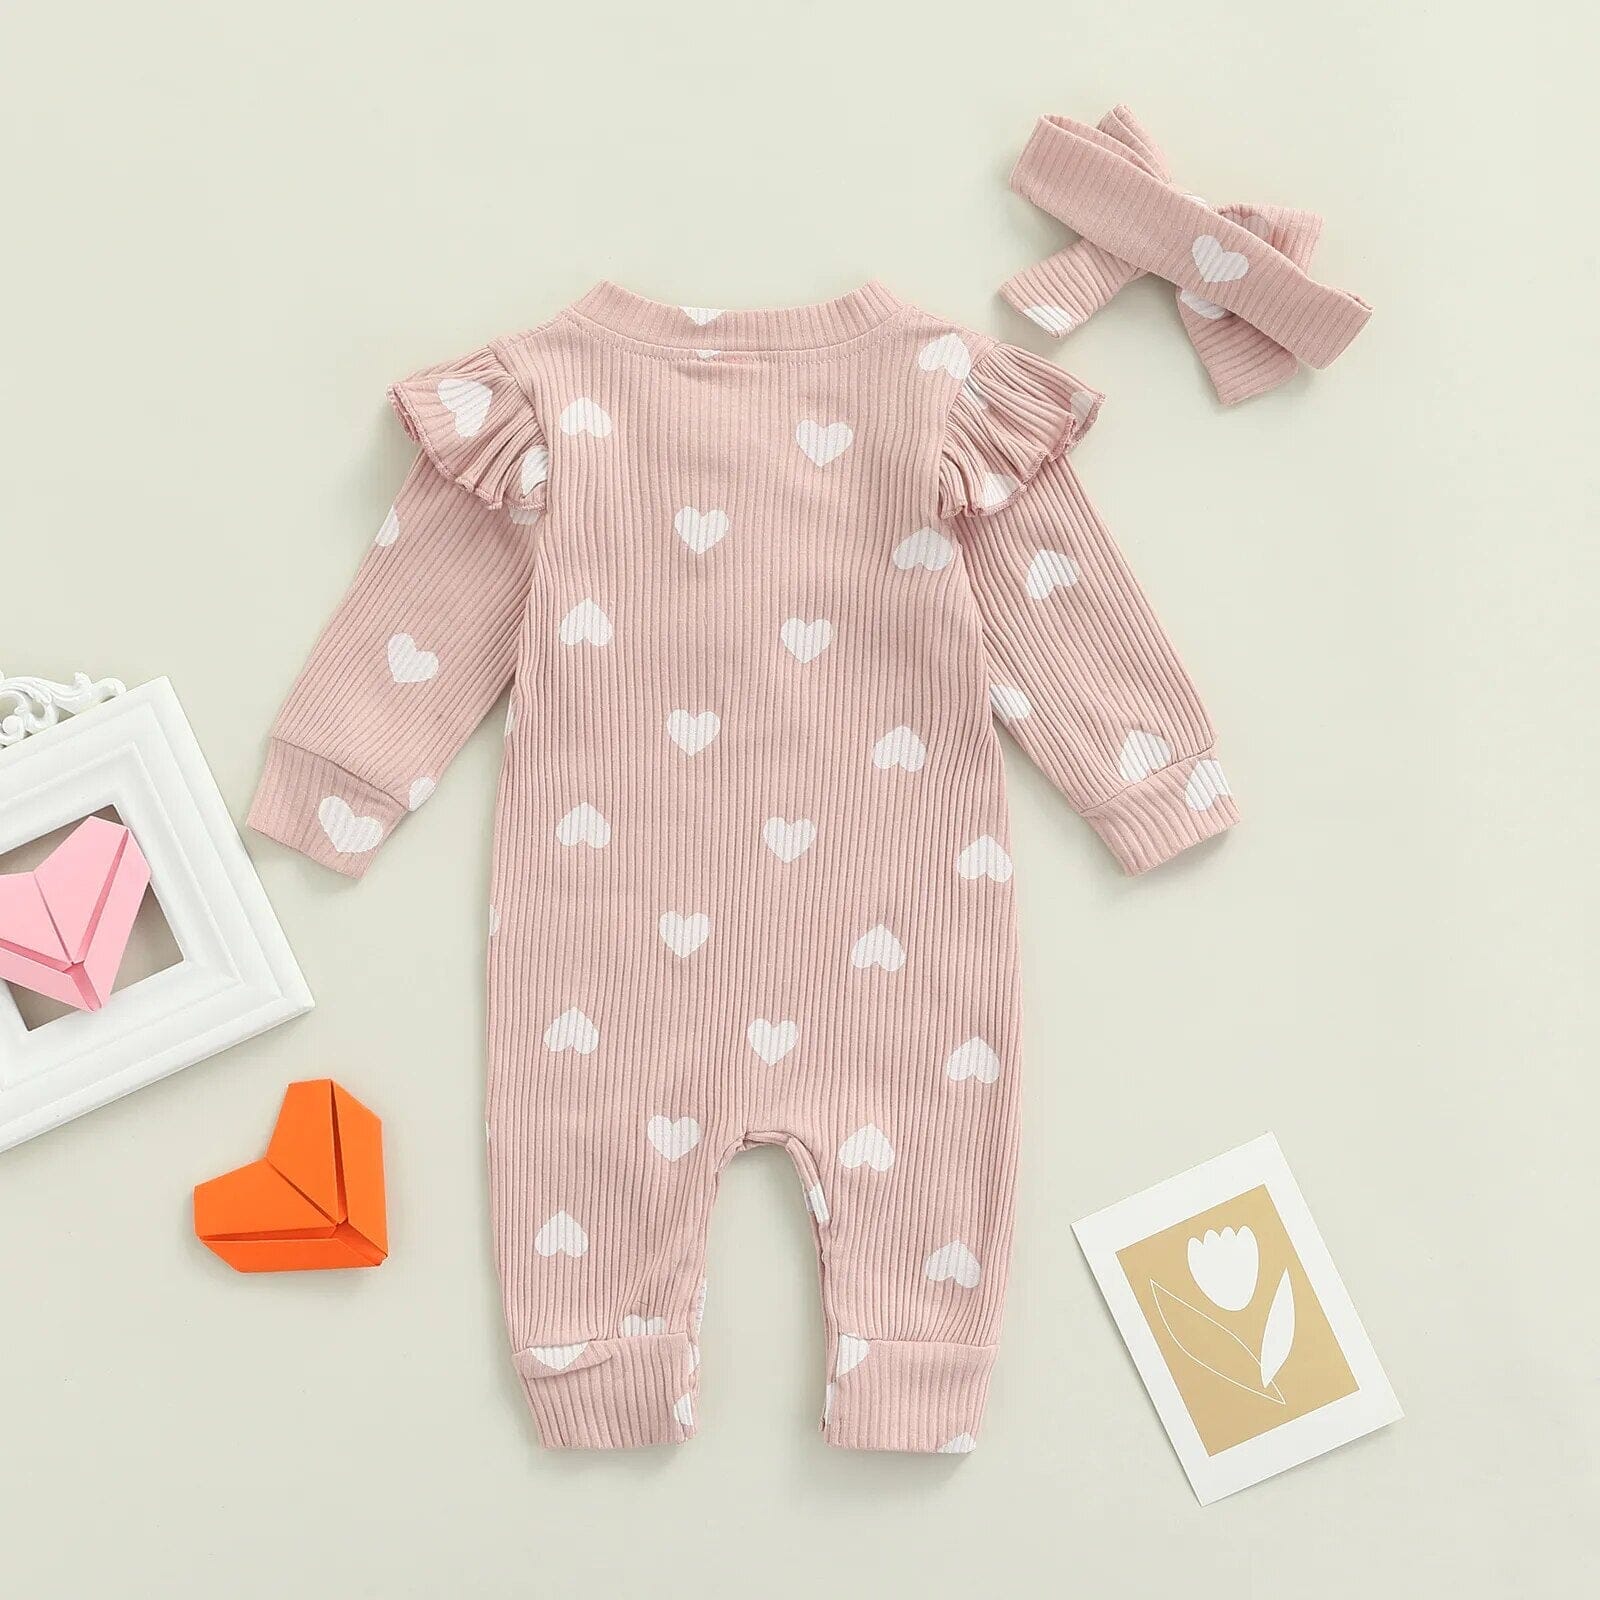 Ma&Baby 0-18M Valentine's Newborn Infant Baby Girl Jumpsuit Heart Print Rompers Long Sleeve Playsuit Clothing Autumn Spring D35 Baby Bubble Store 